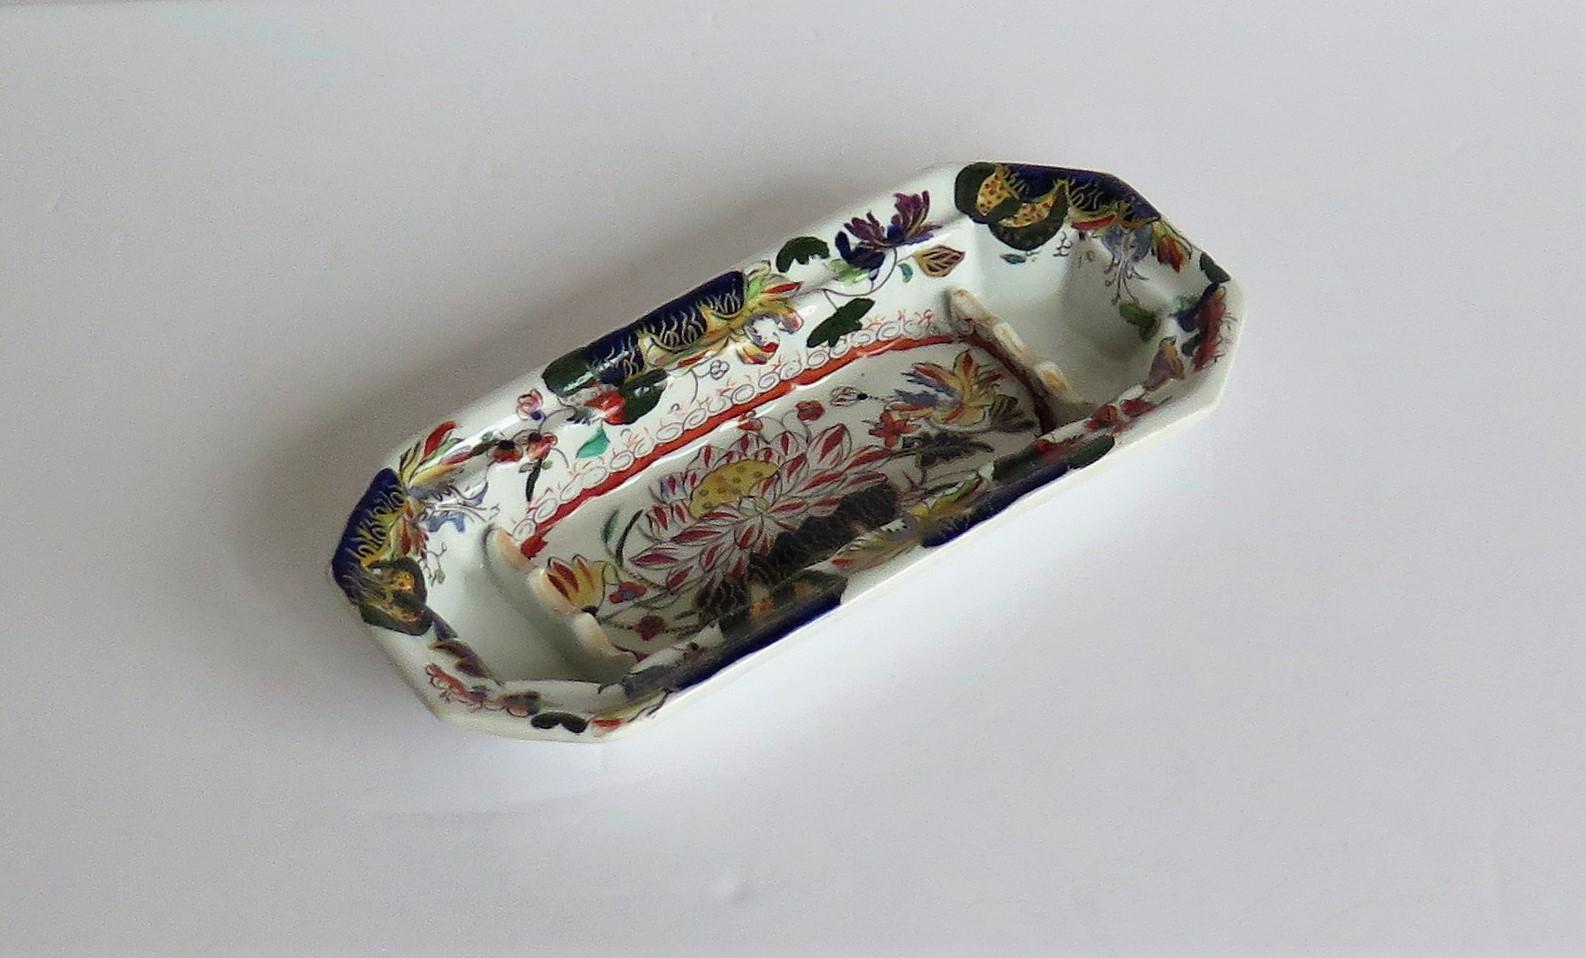 Chinoiserie Rare Mason's Ironstone Pen Tray or Dish in Water Lily Pattern, circa 1830